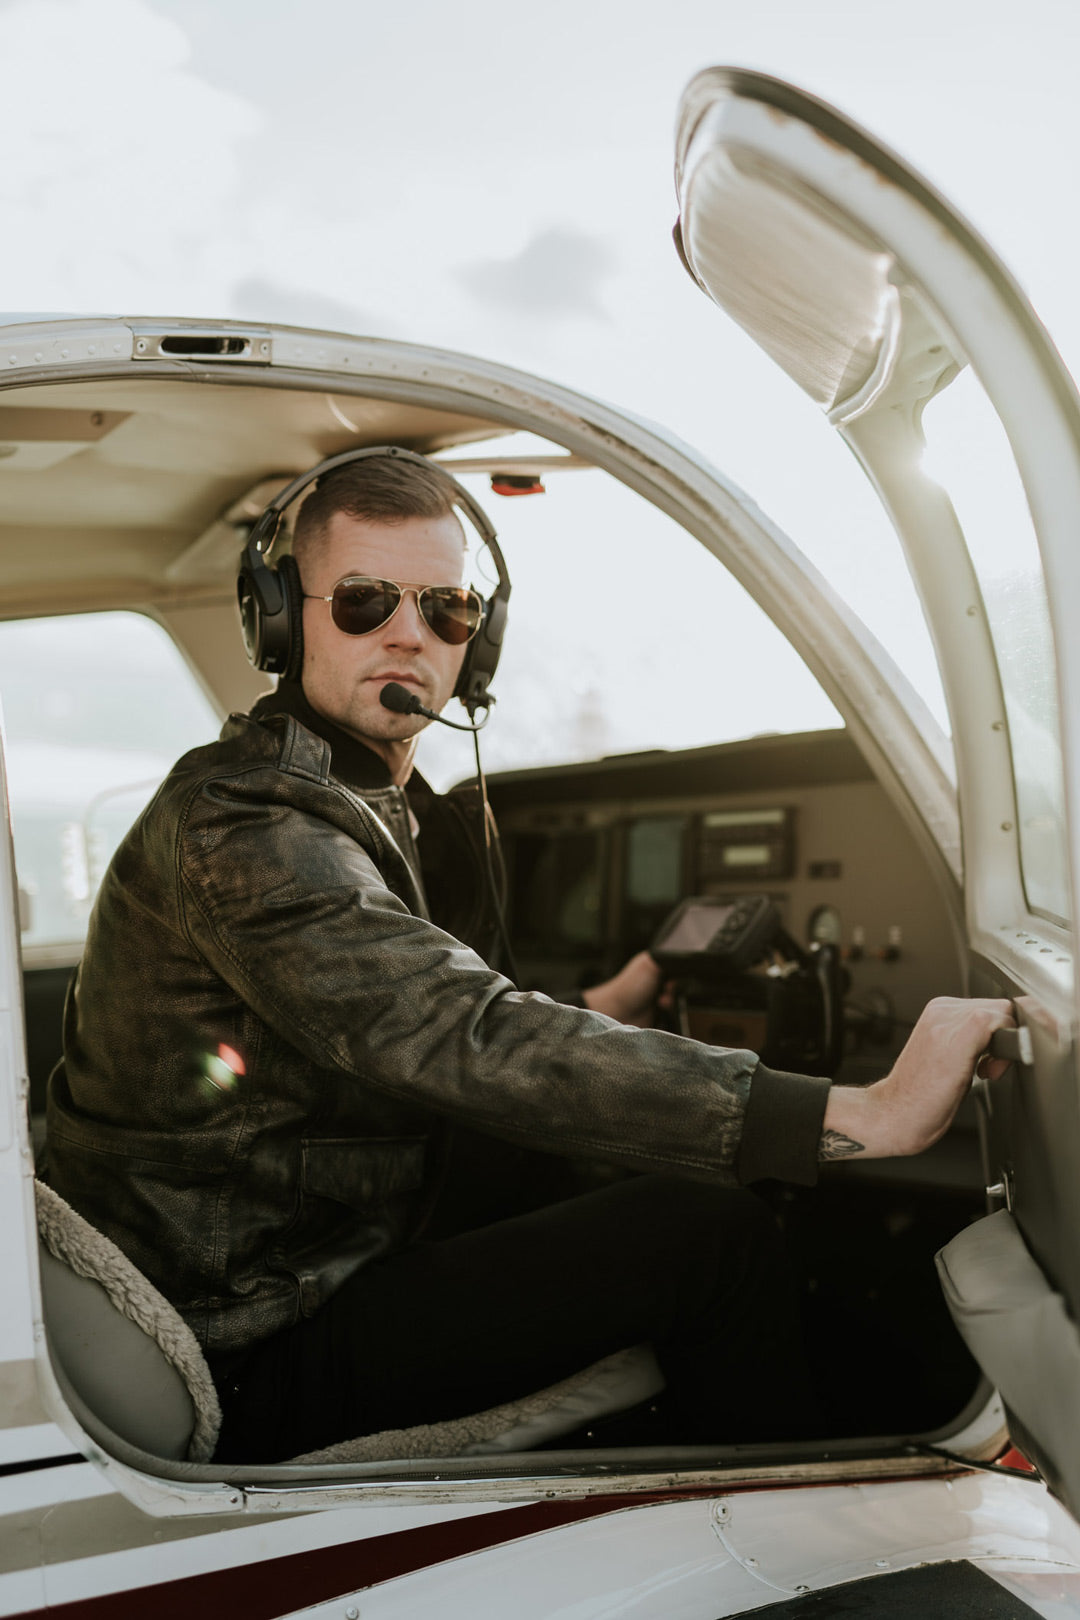 man getting into airplane with modern bomber jacket